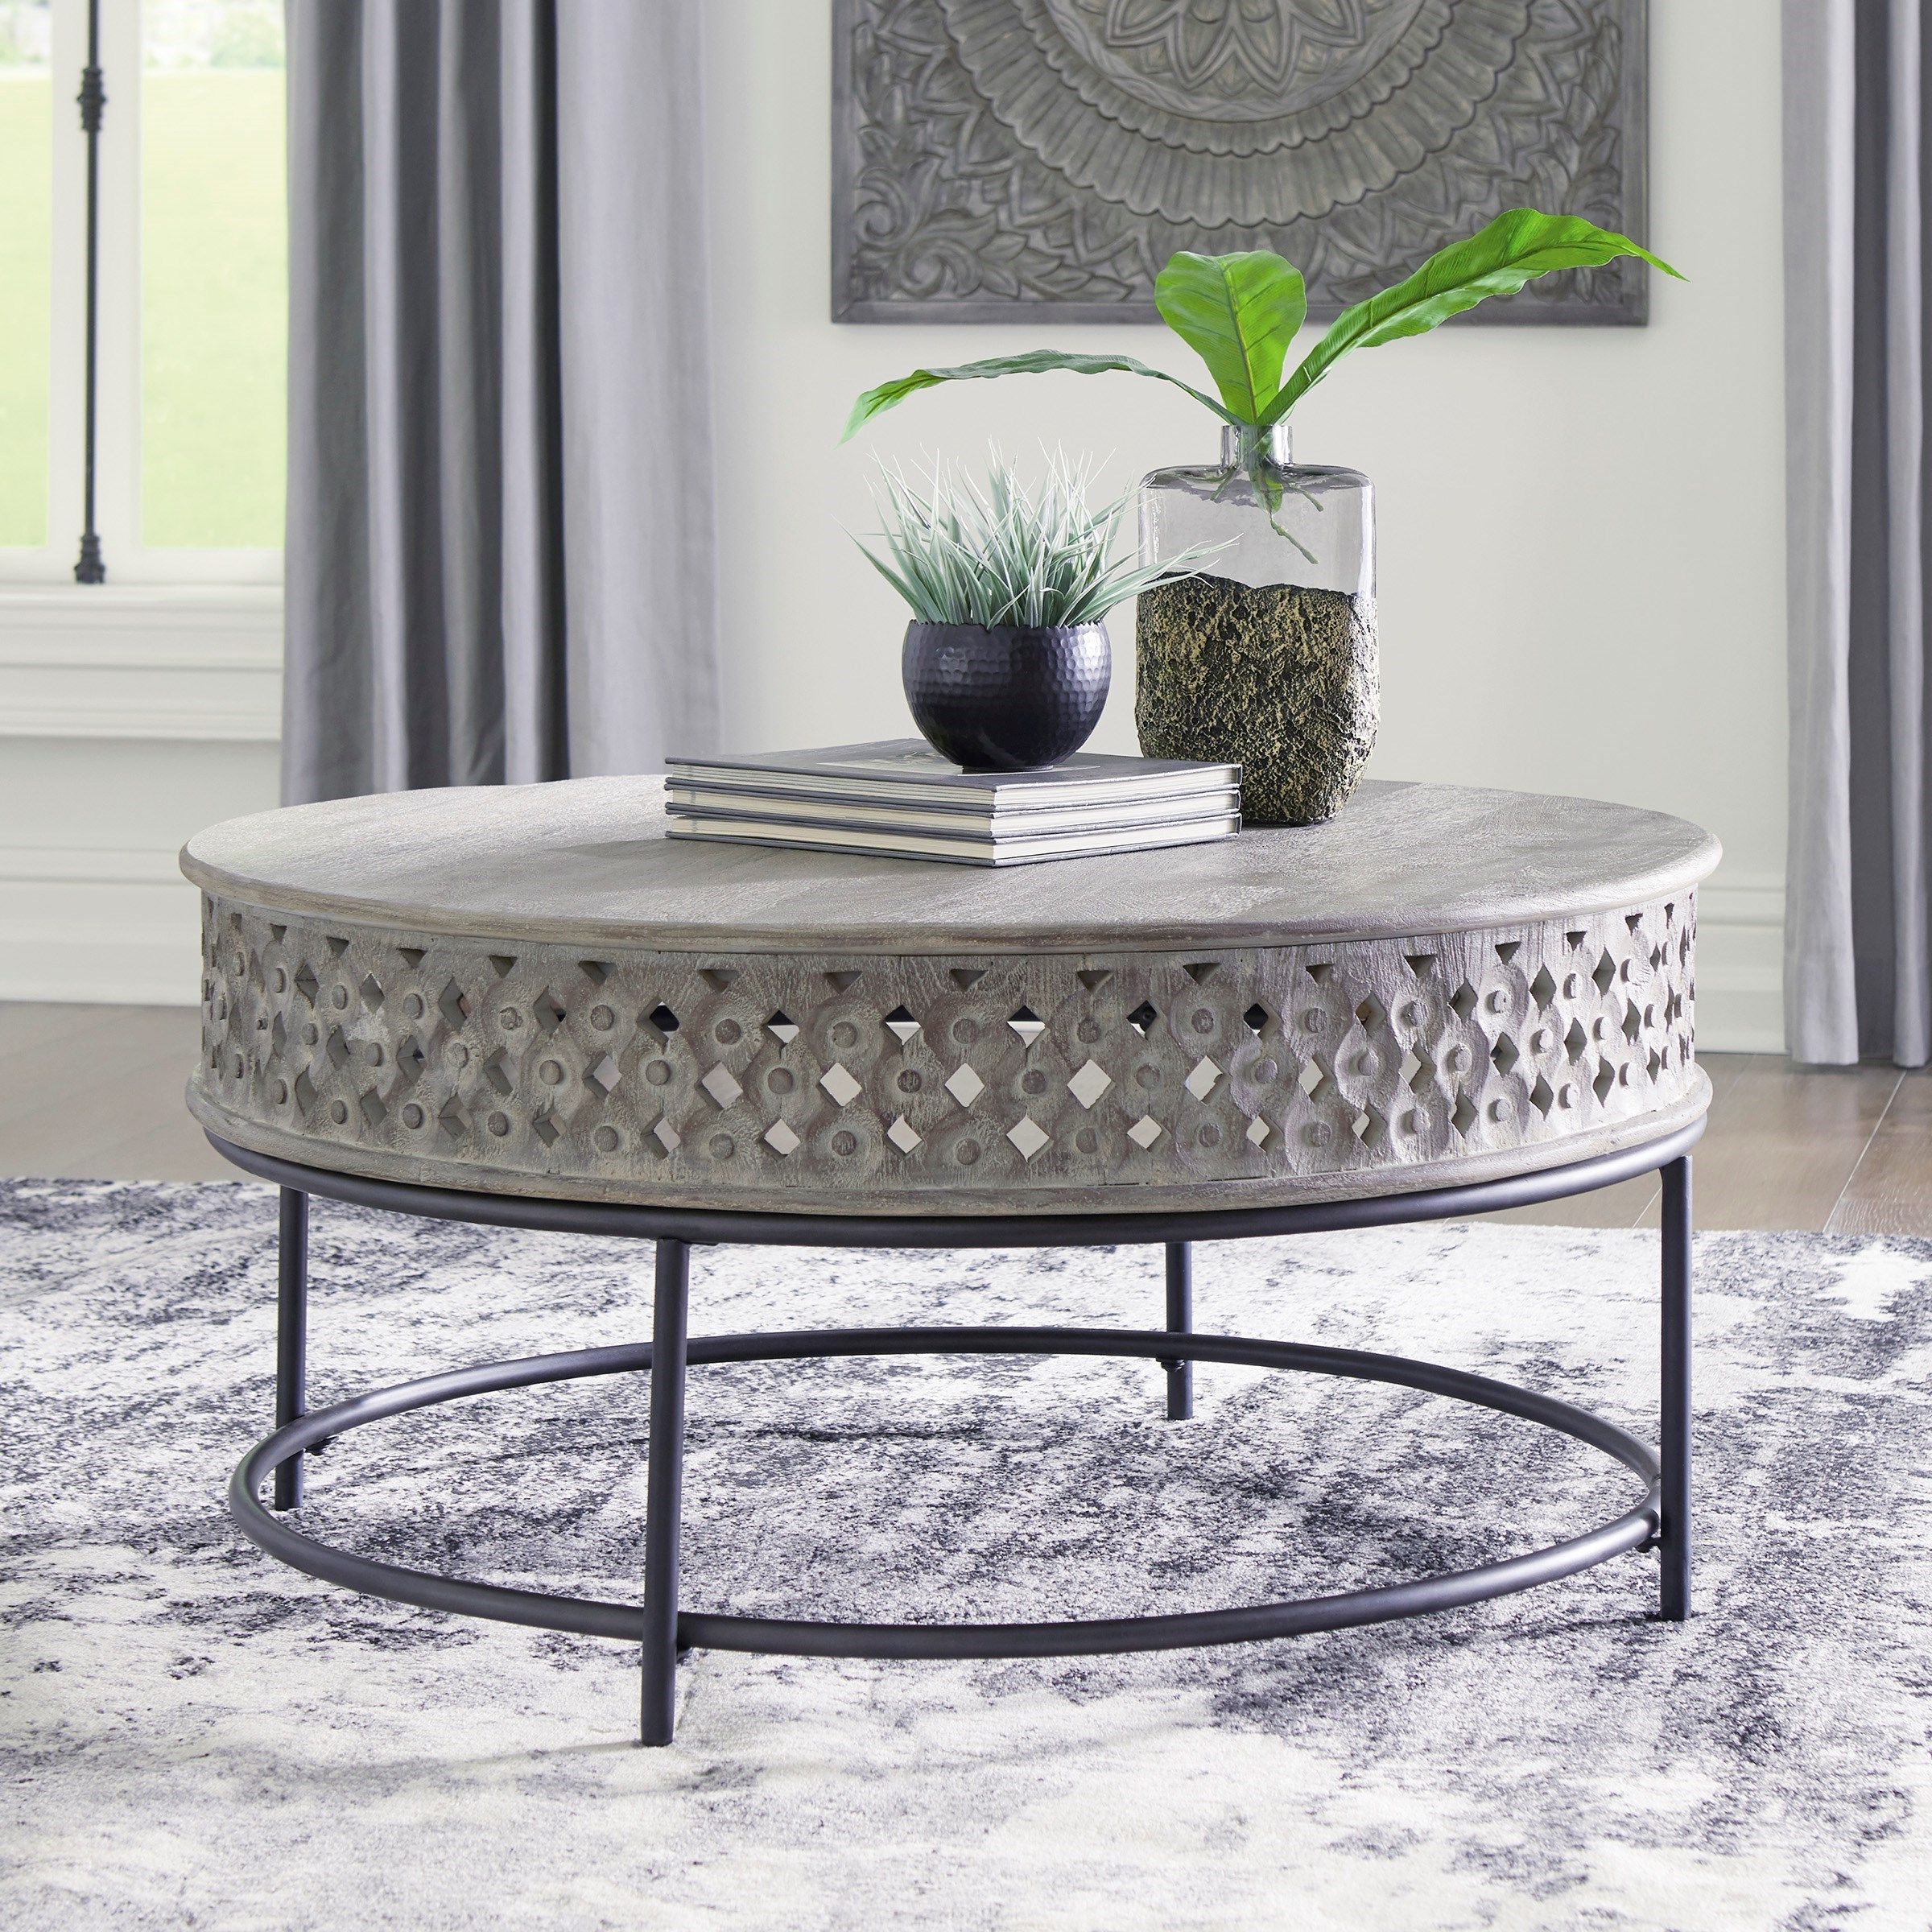 Signature Designashley Rastella T968 8 Carved Mango Pertaining To Fashionable Gray Driftwood And Metal Coffee Tables (View 12 of 20)